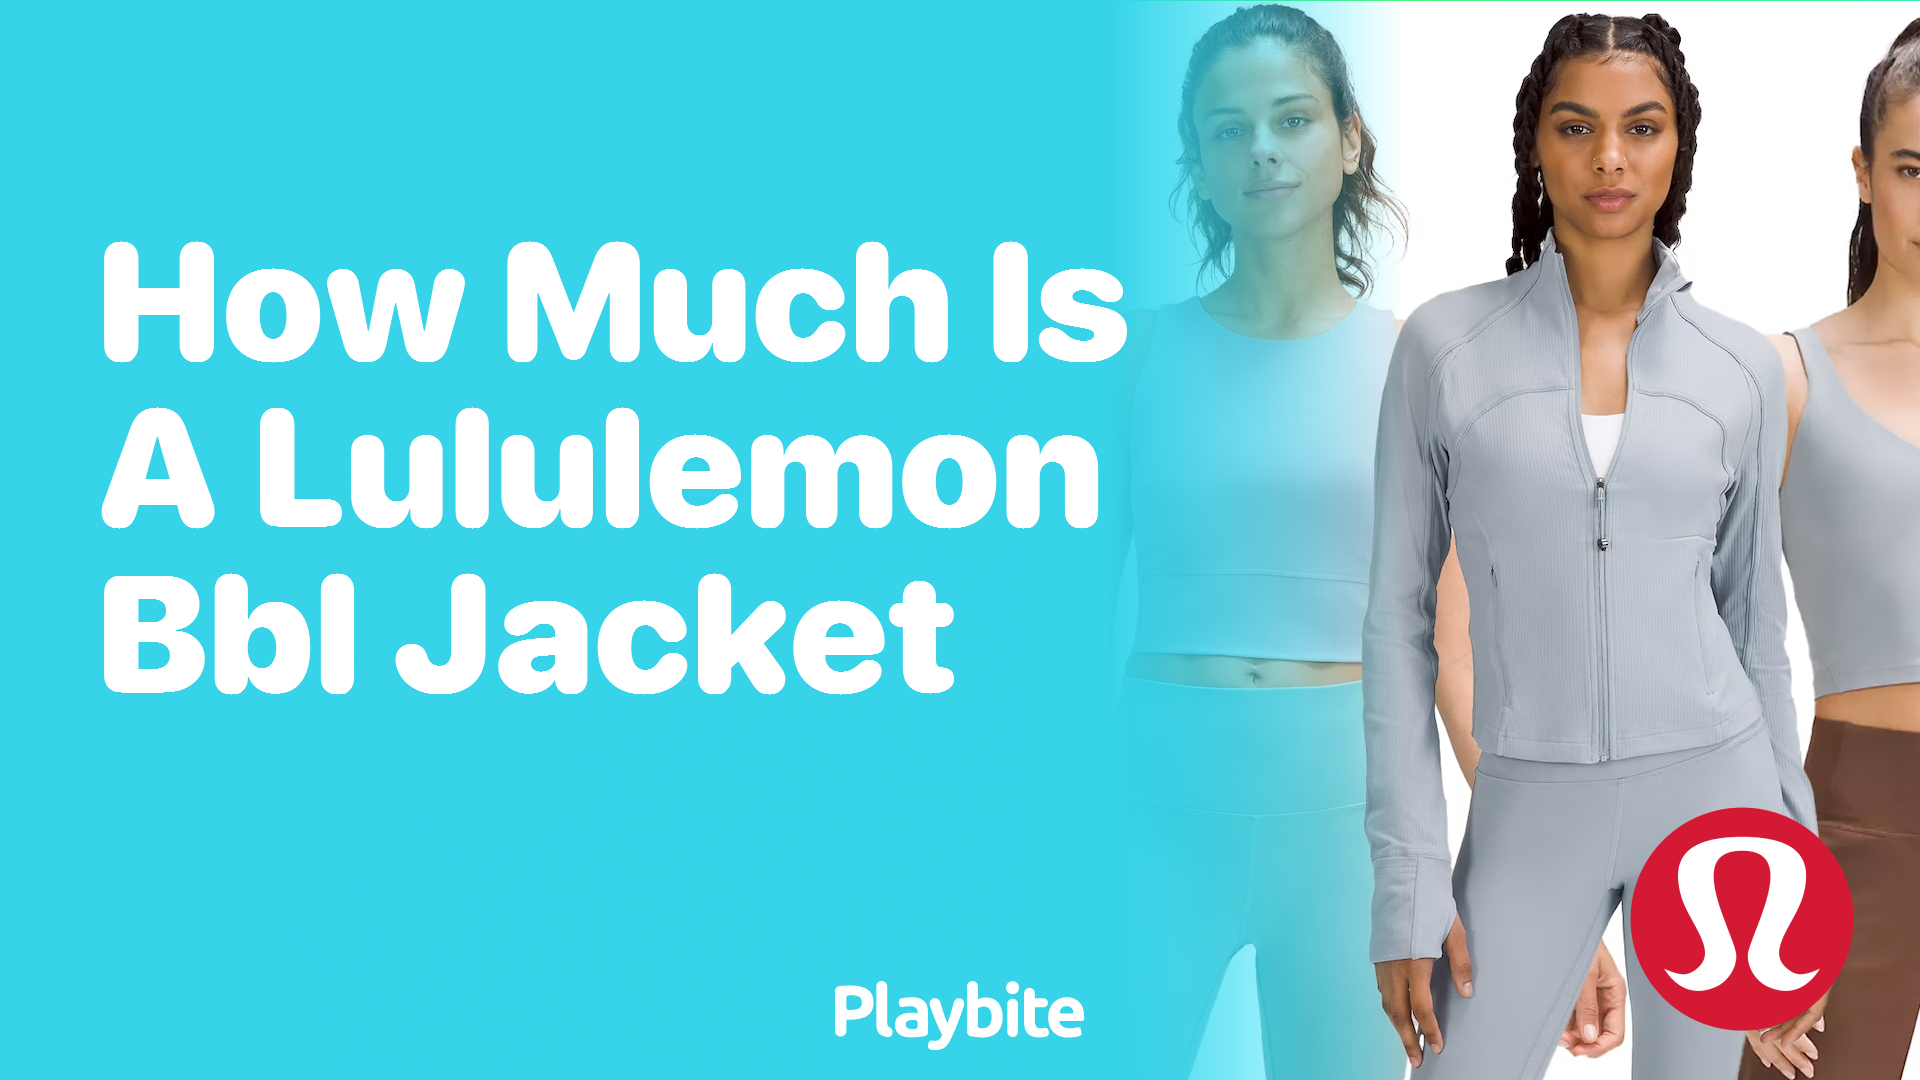 How Much Does a Lululemon BBL Jacket Cost? - Playbite